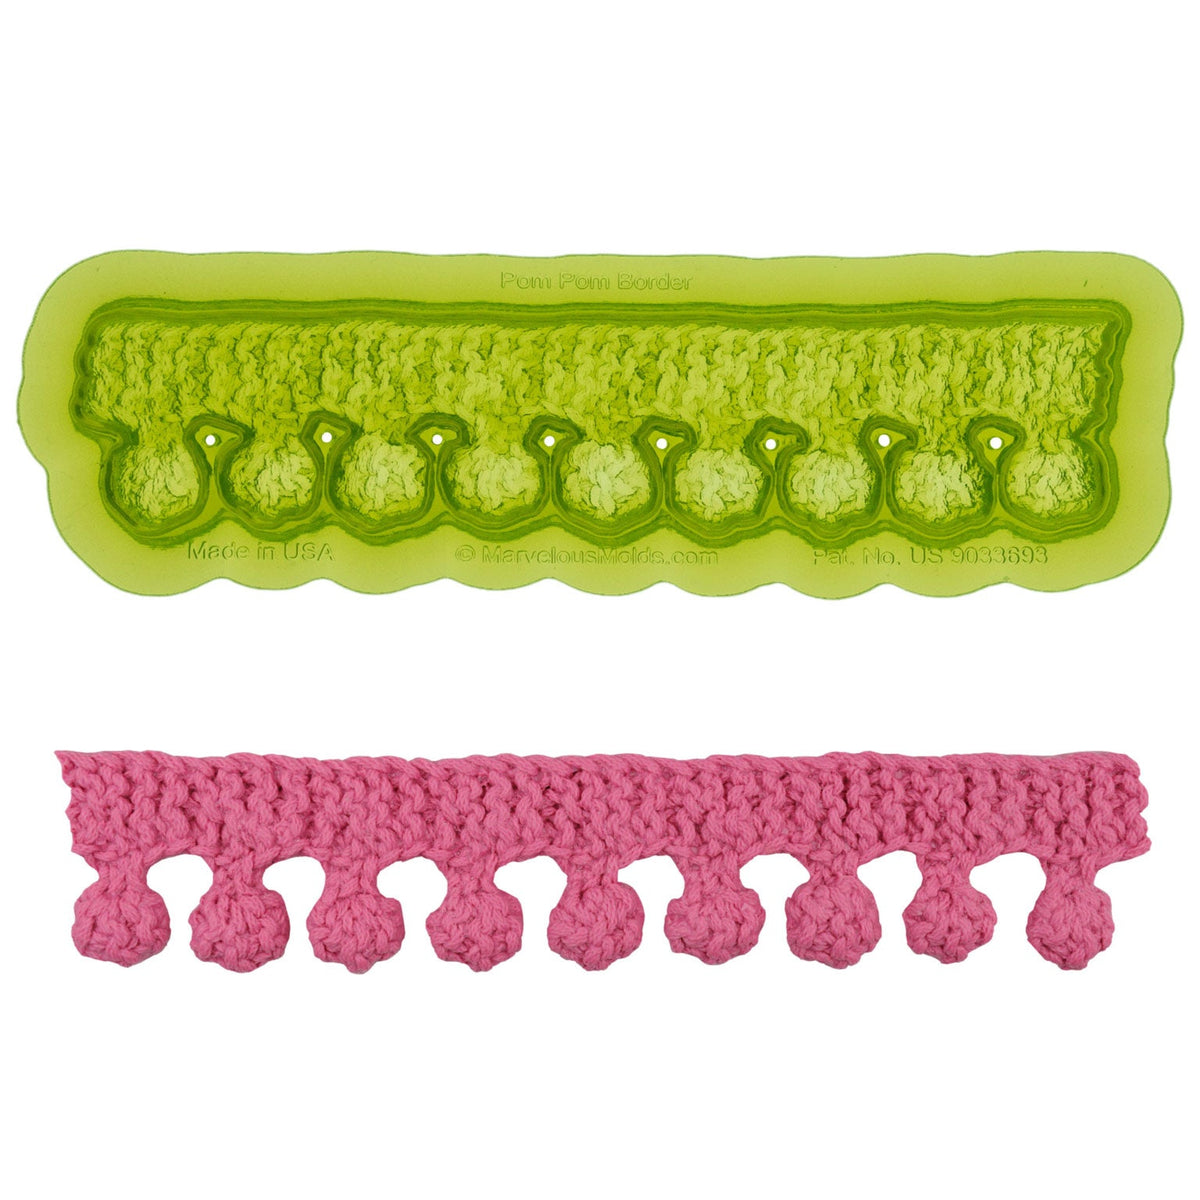 Marvelous Molds Small Knit Buttons Silicone Food Safe Mold for Fondant Cake Designs